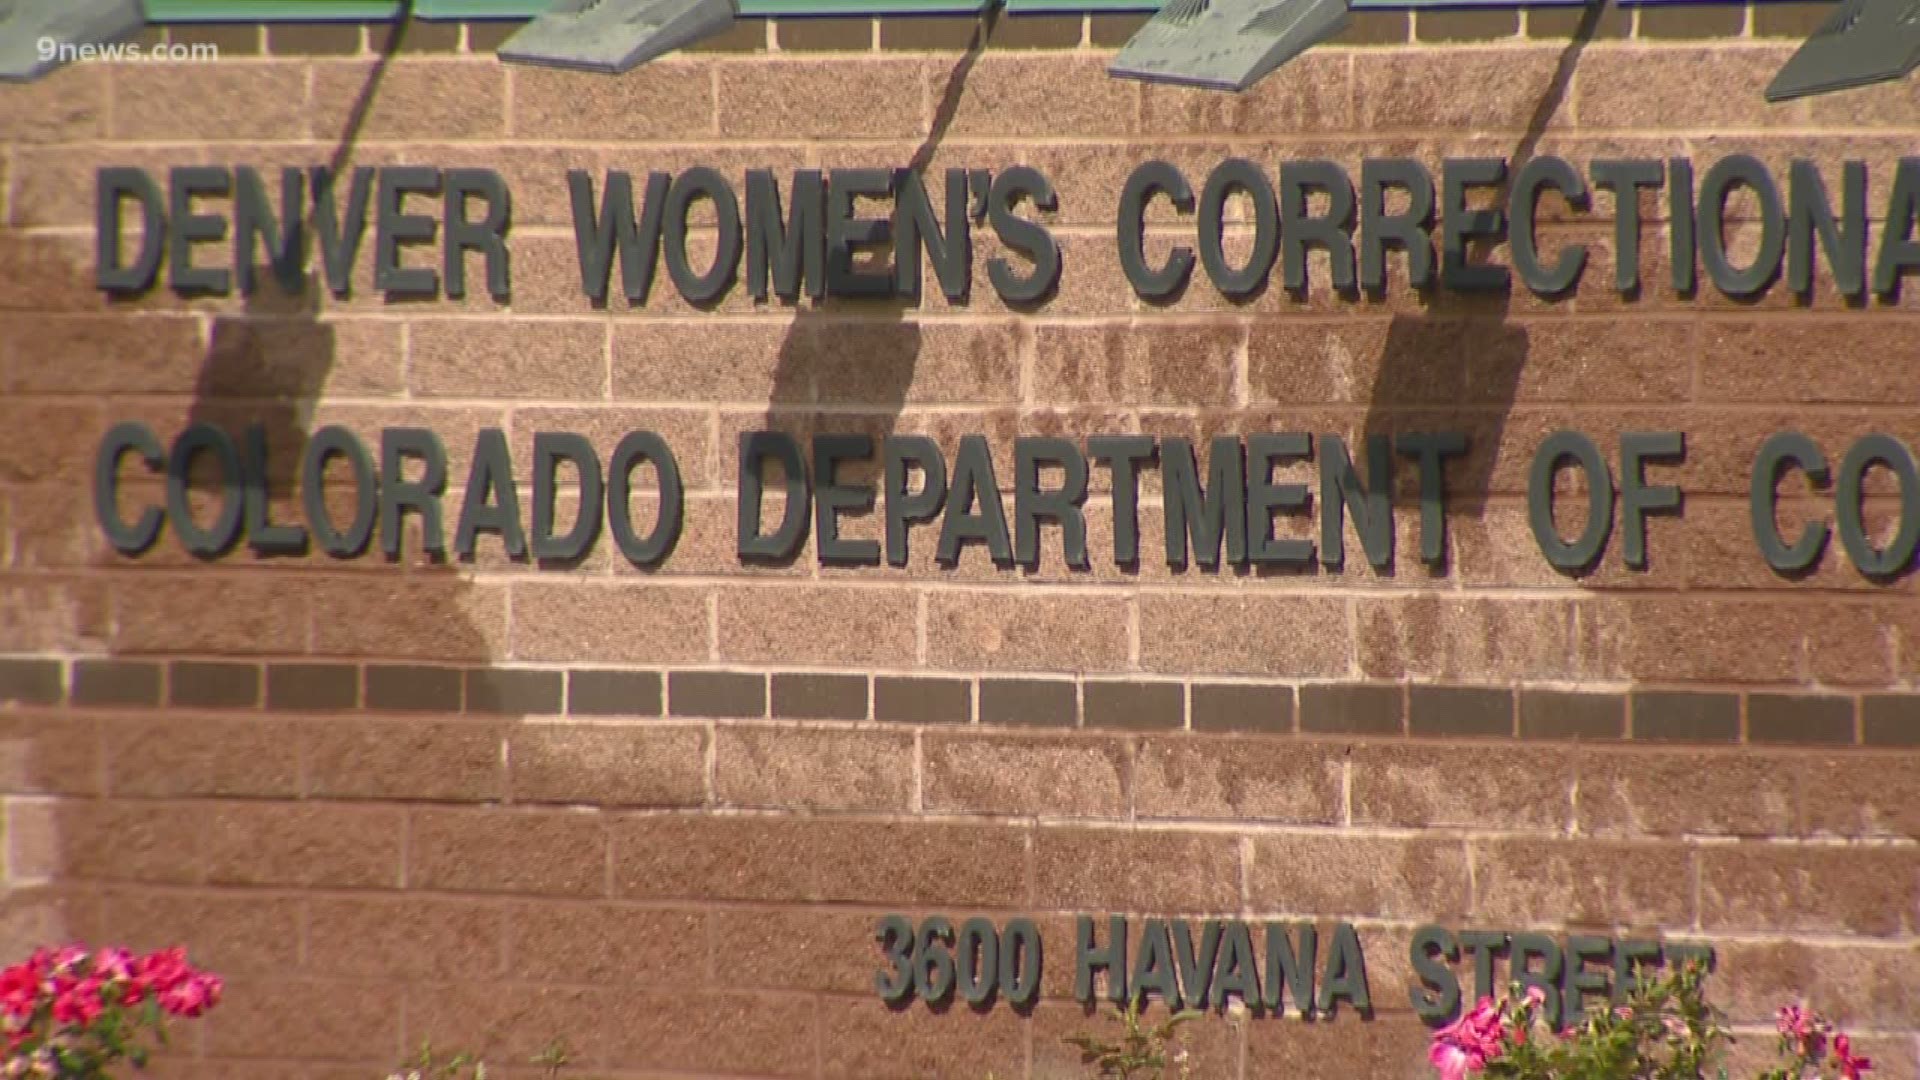 Two state correctional officers who worked at the same women's prison in Denver have been arrested. One is suspected of committing a murder and the other accused of trying to pimp out women he may have met in that prison.